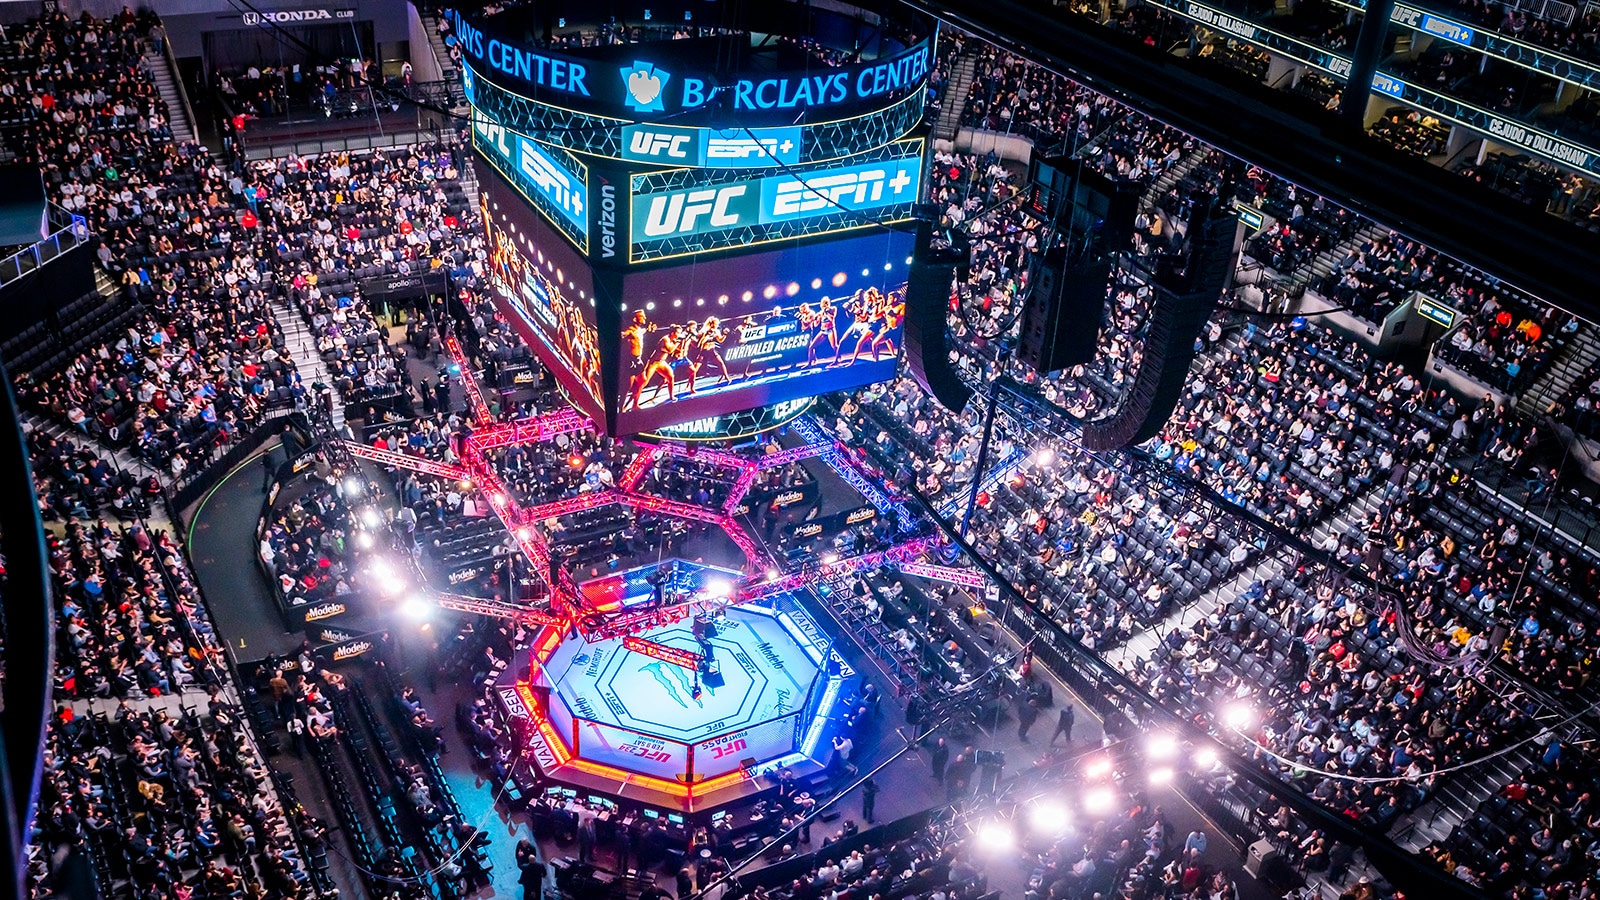 Meyer Sound LEOPARD Scores a TKO with “Dream System” for Intense UFC Events